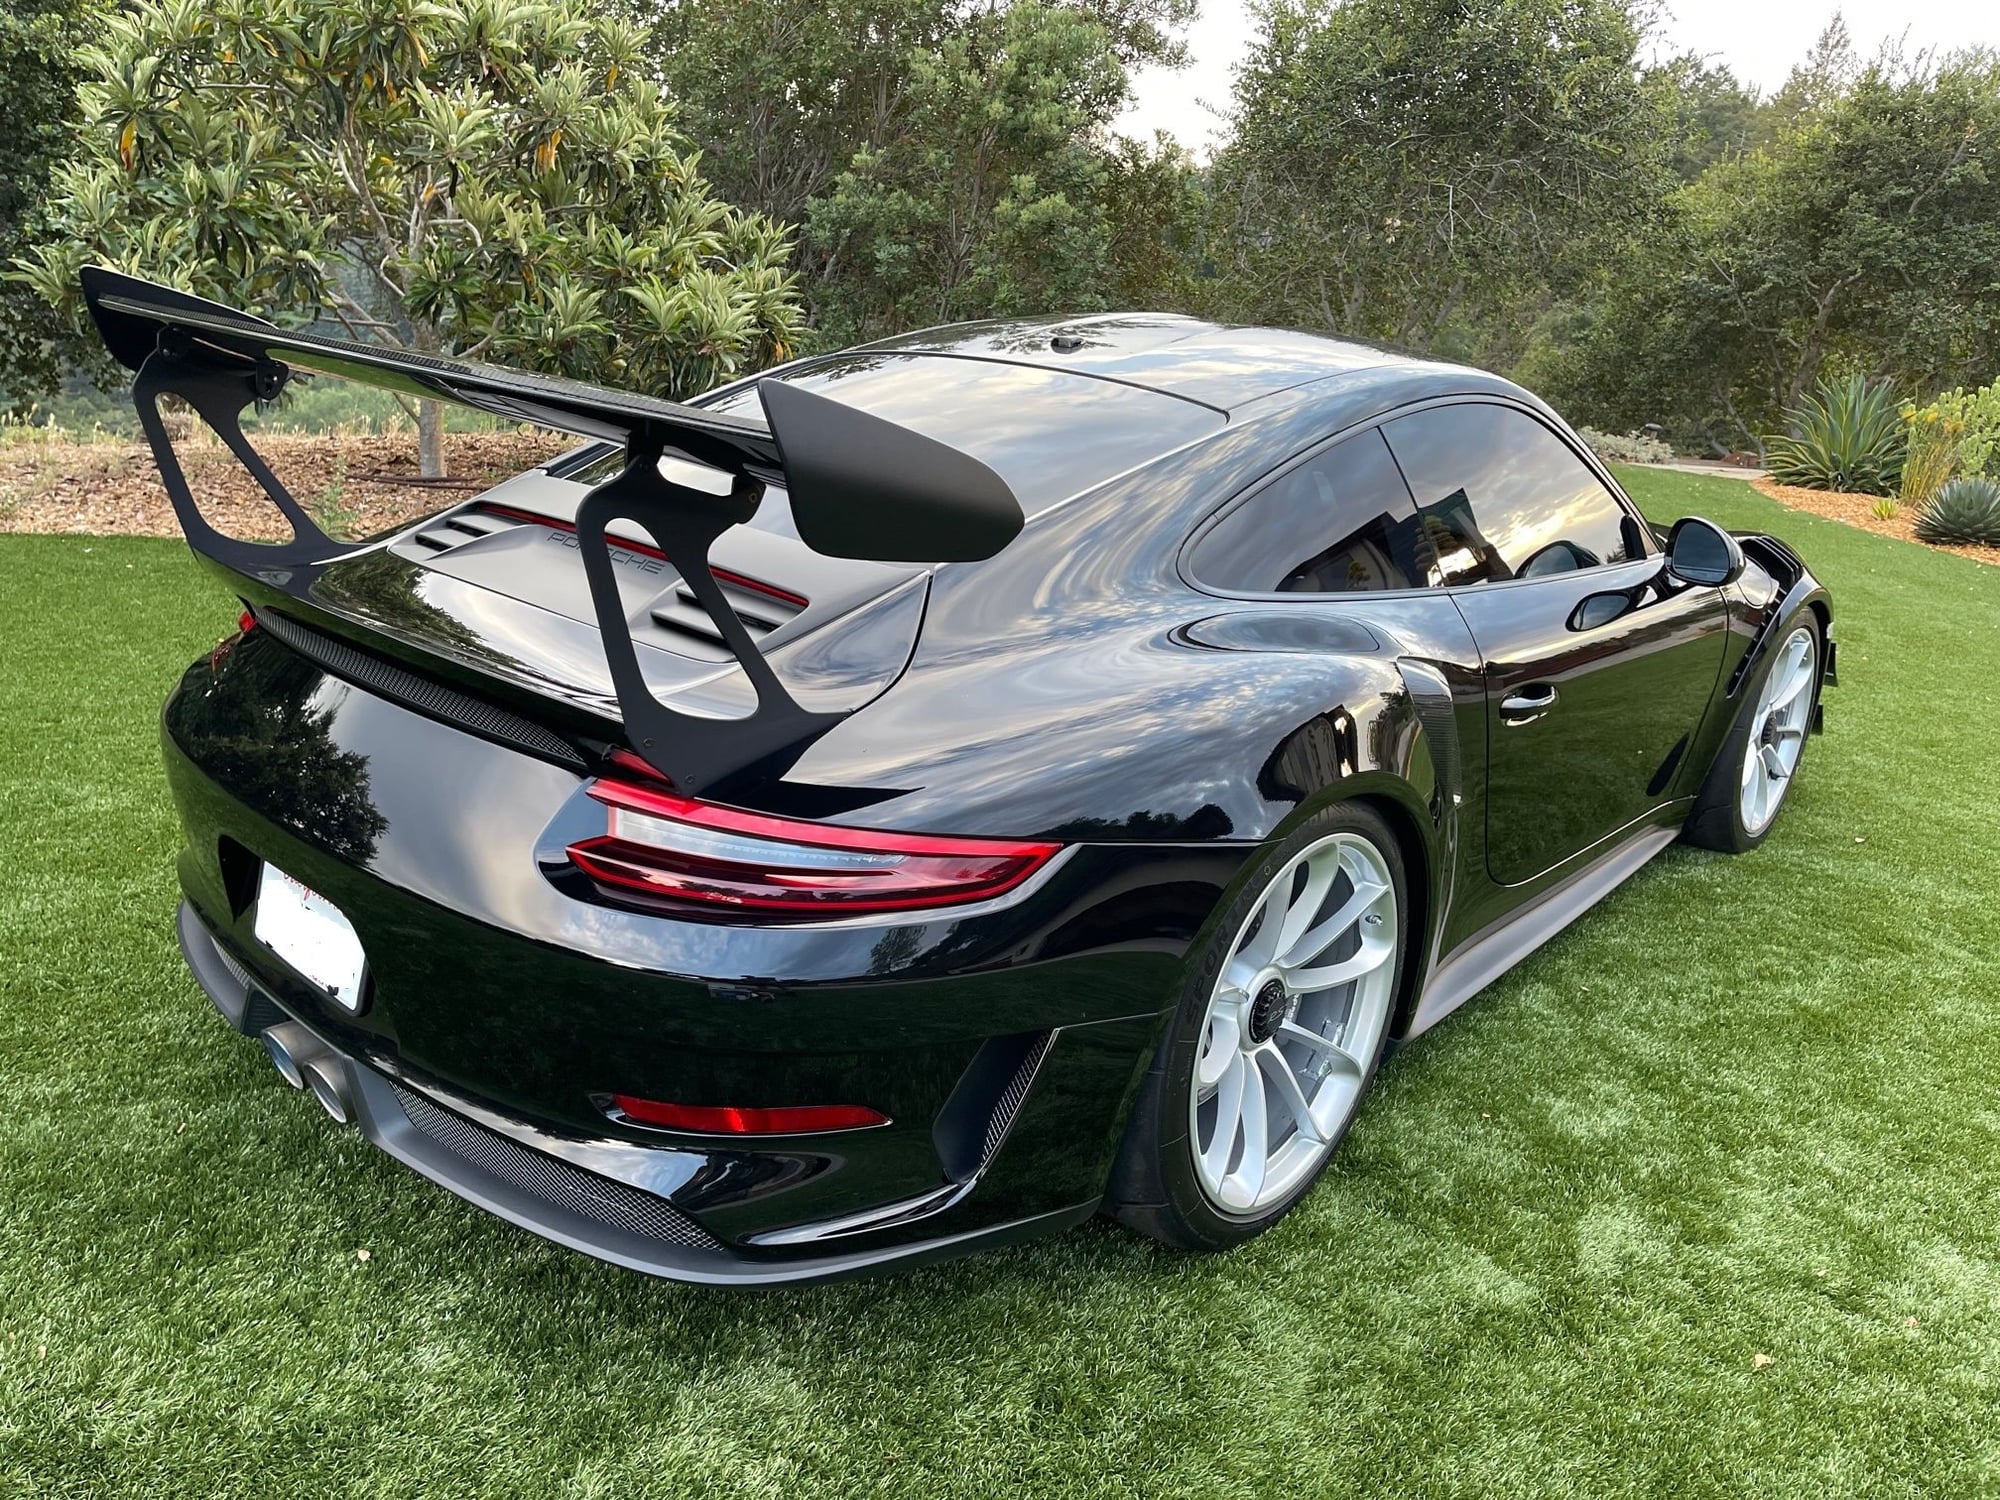 2019 Porsche GT3 - 2019 GT3RS Weissach package 8,477 miles - Used - VIN WP0AF2A91KS165252 - 8,477 Miles - 2WD - Automatic - Coupe - Black - Santa Cruz, CA 95060, United States